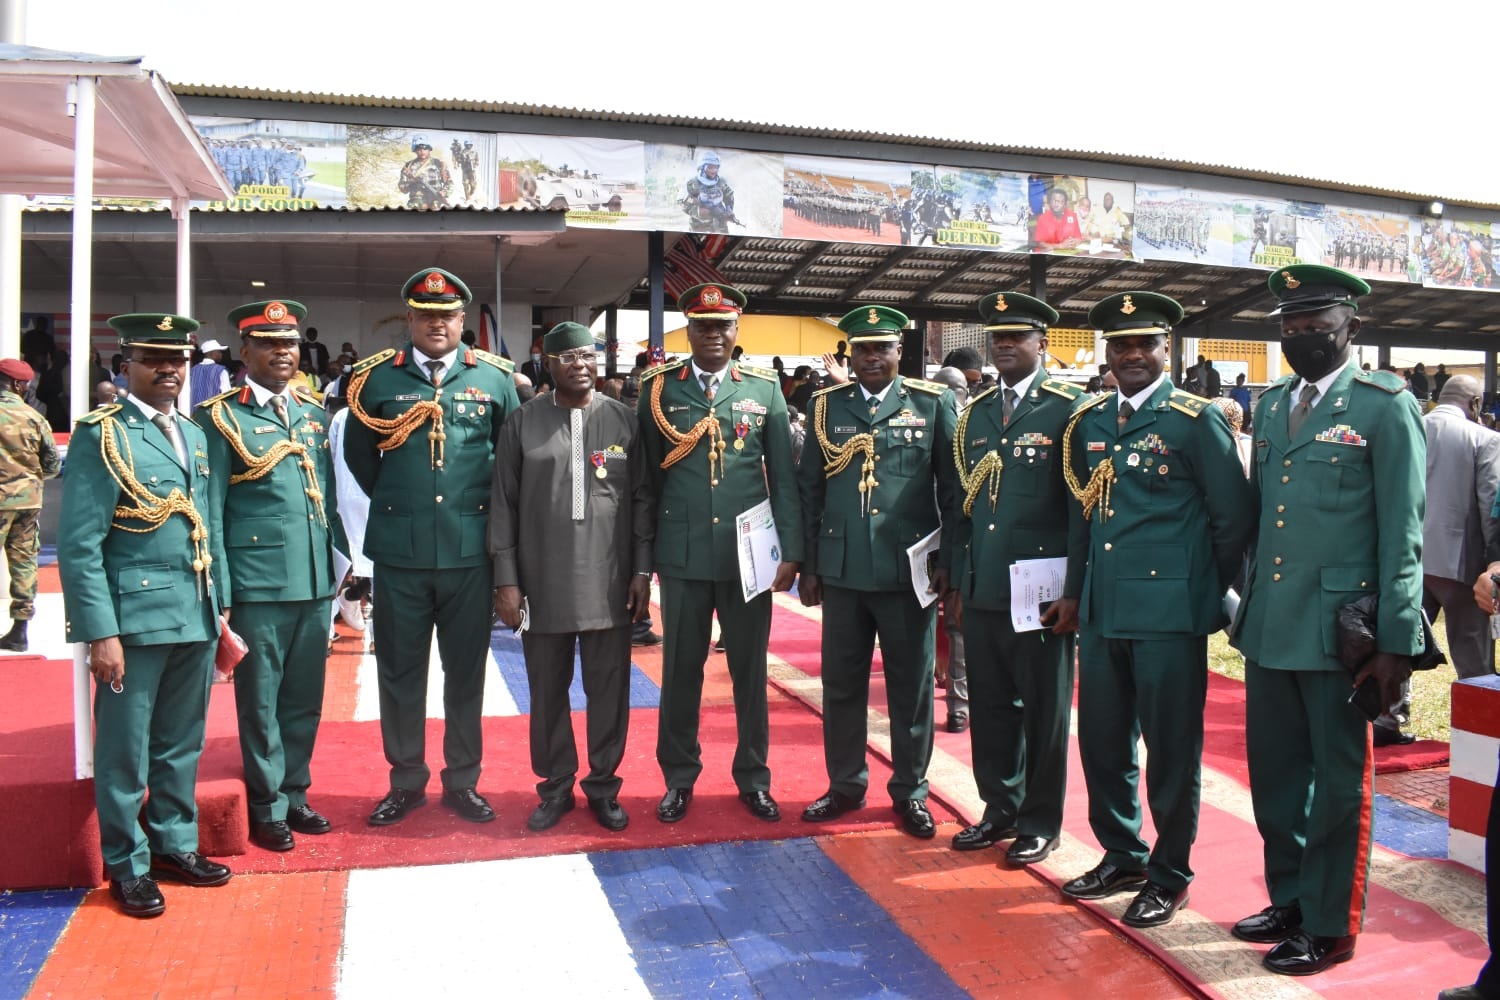 Liberian President Awards Nigerian Army Officers For Exemplary Service 1